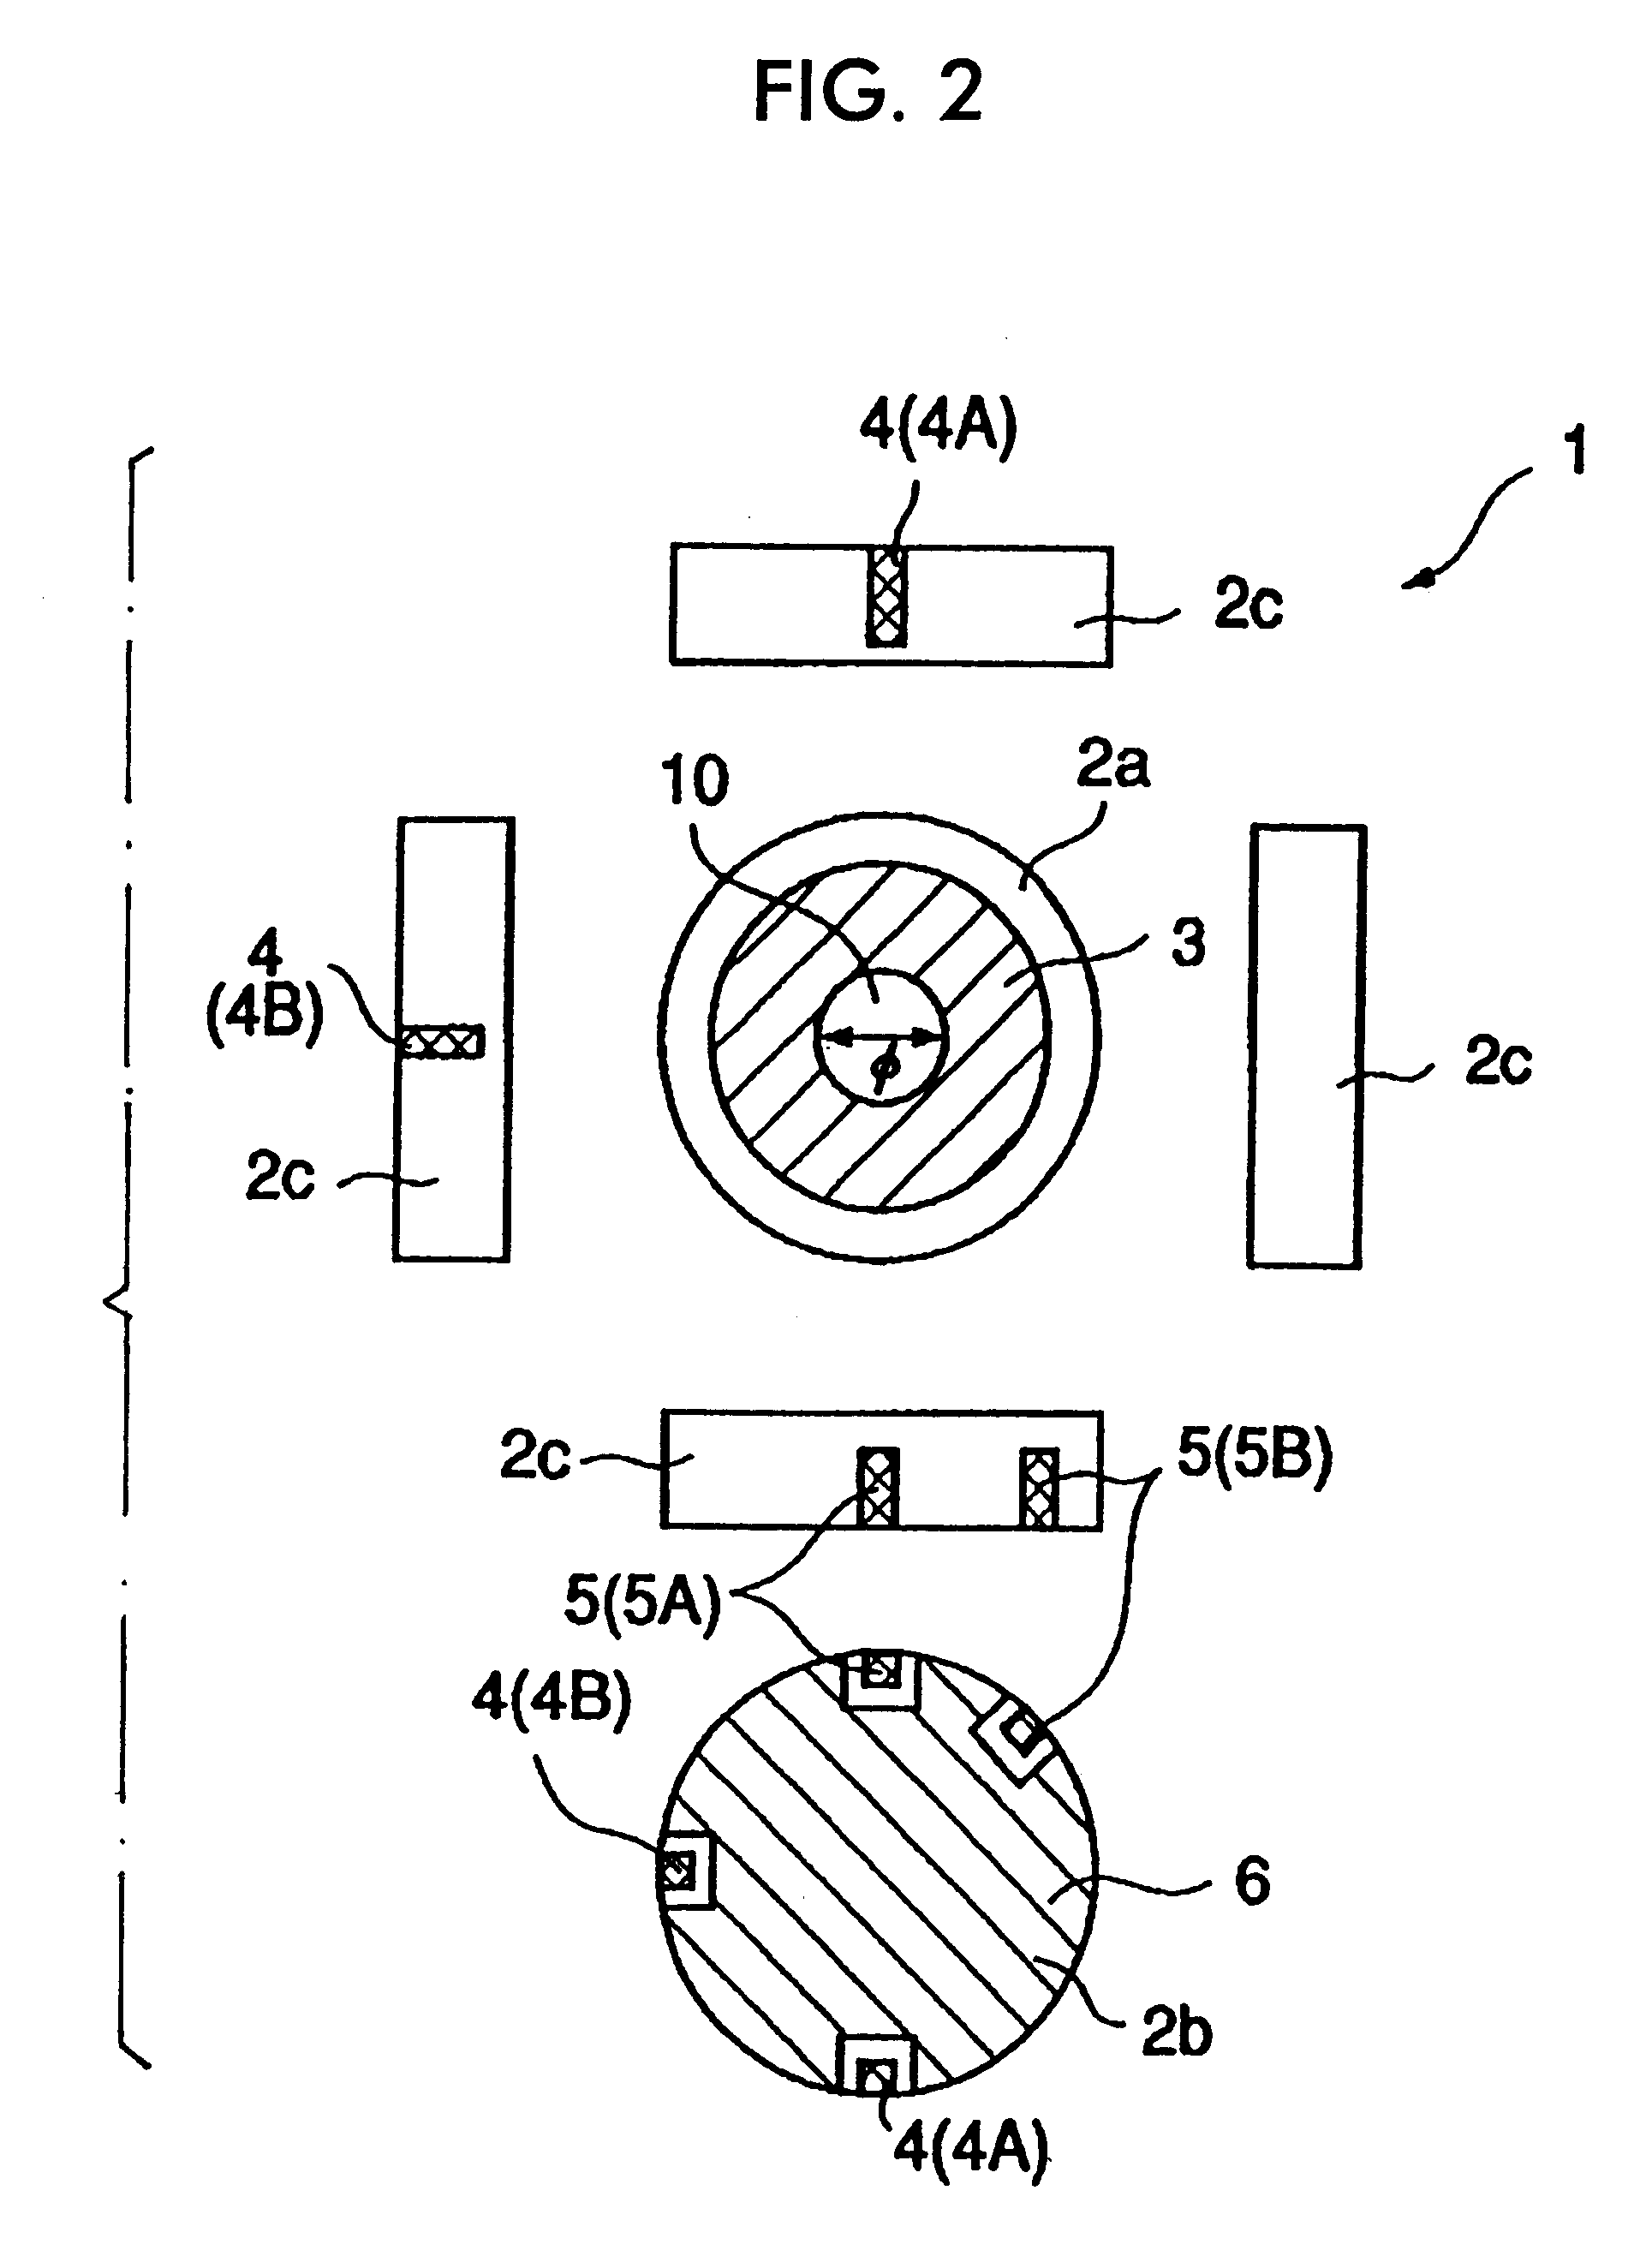 Circularly polarized wave antenna and device using the same